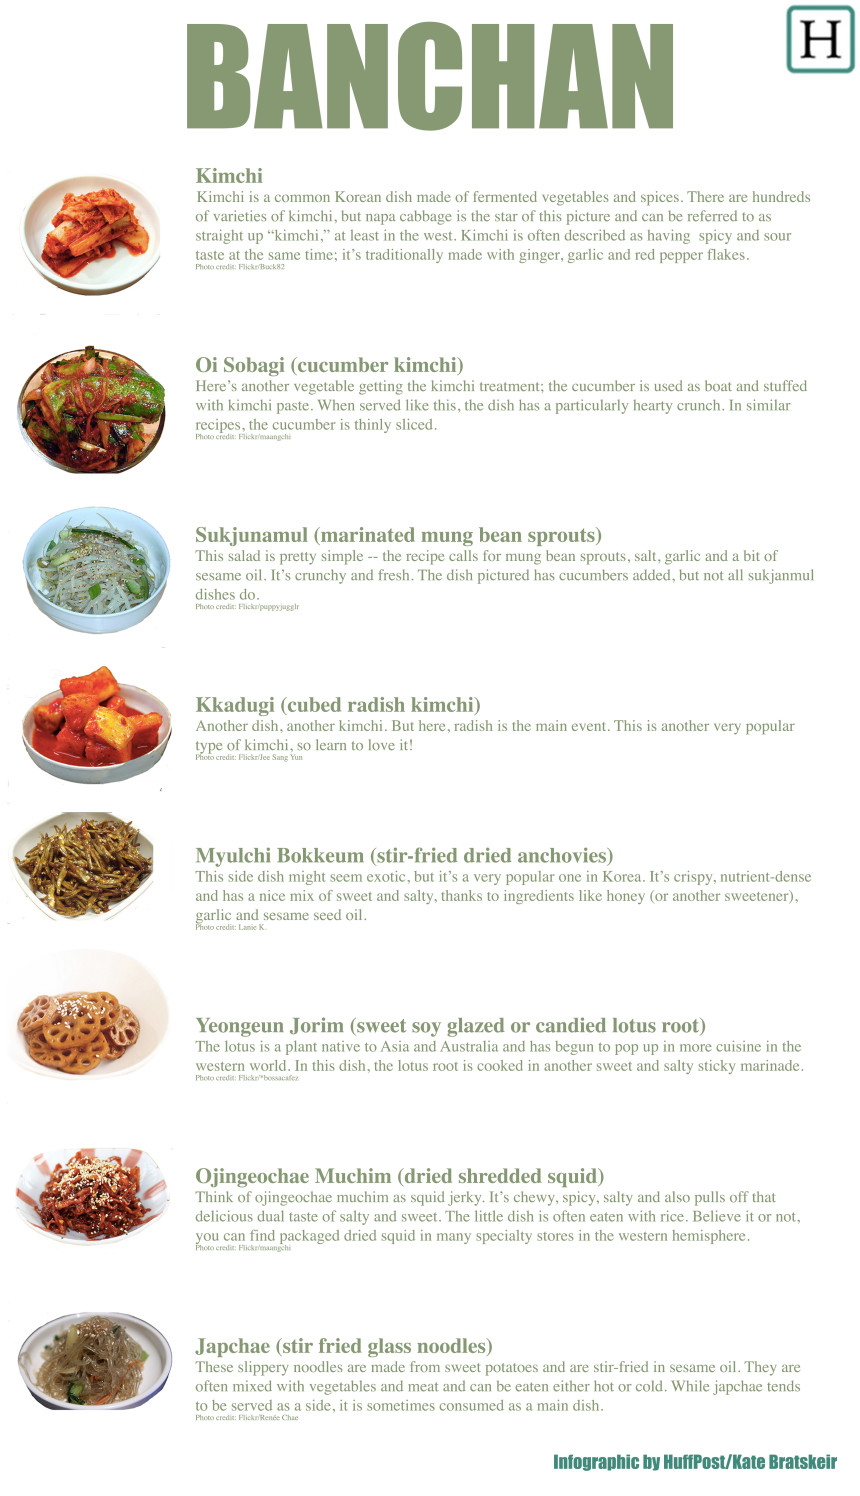 A Guide To Banchan, Those Delicious Side Dishes Served At Korean Restaurants